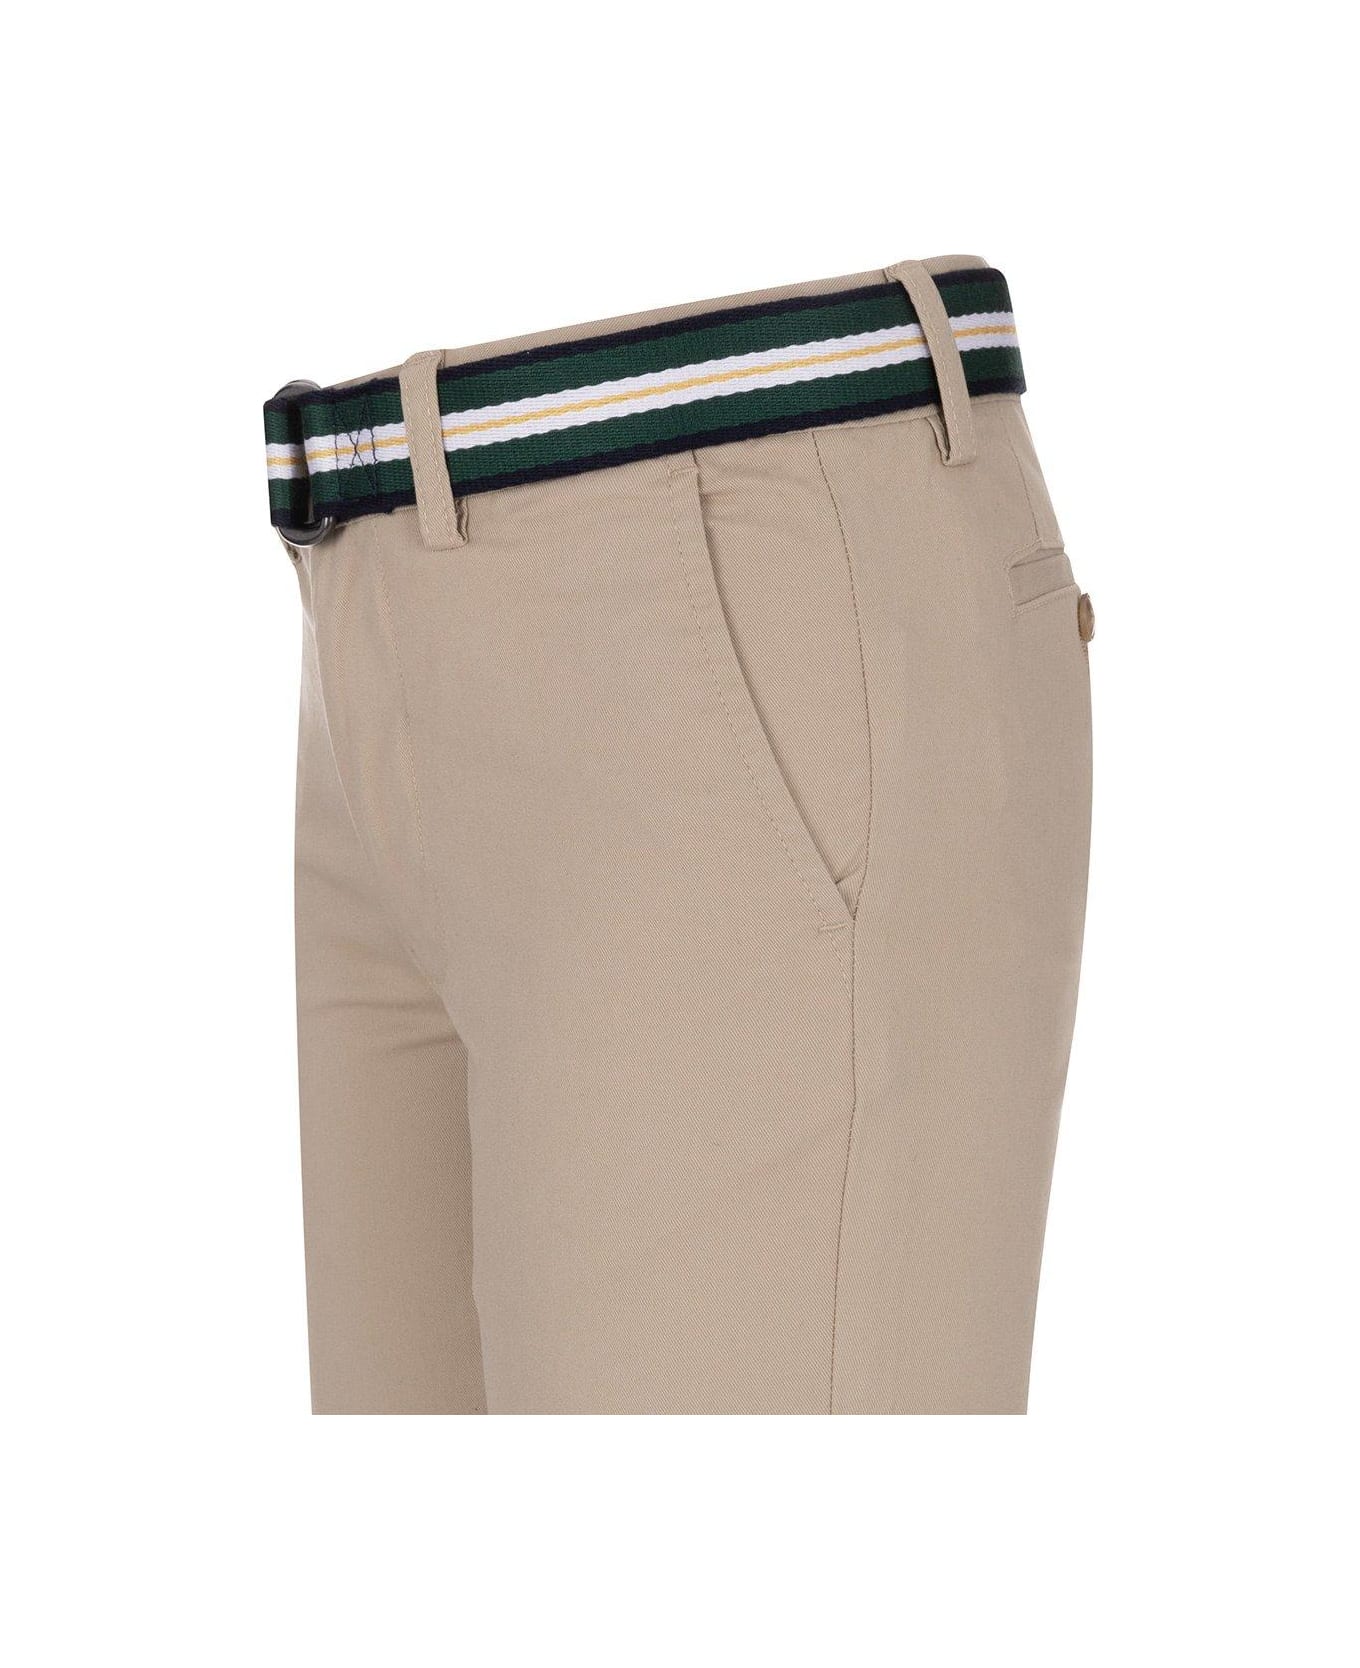 Ralph Lauren Logo Embroidered Belted Trousers - Beige/Khaki